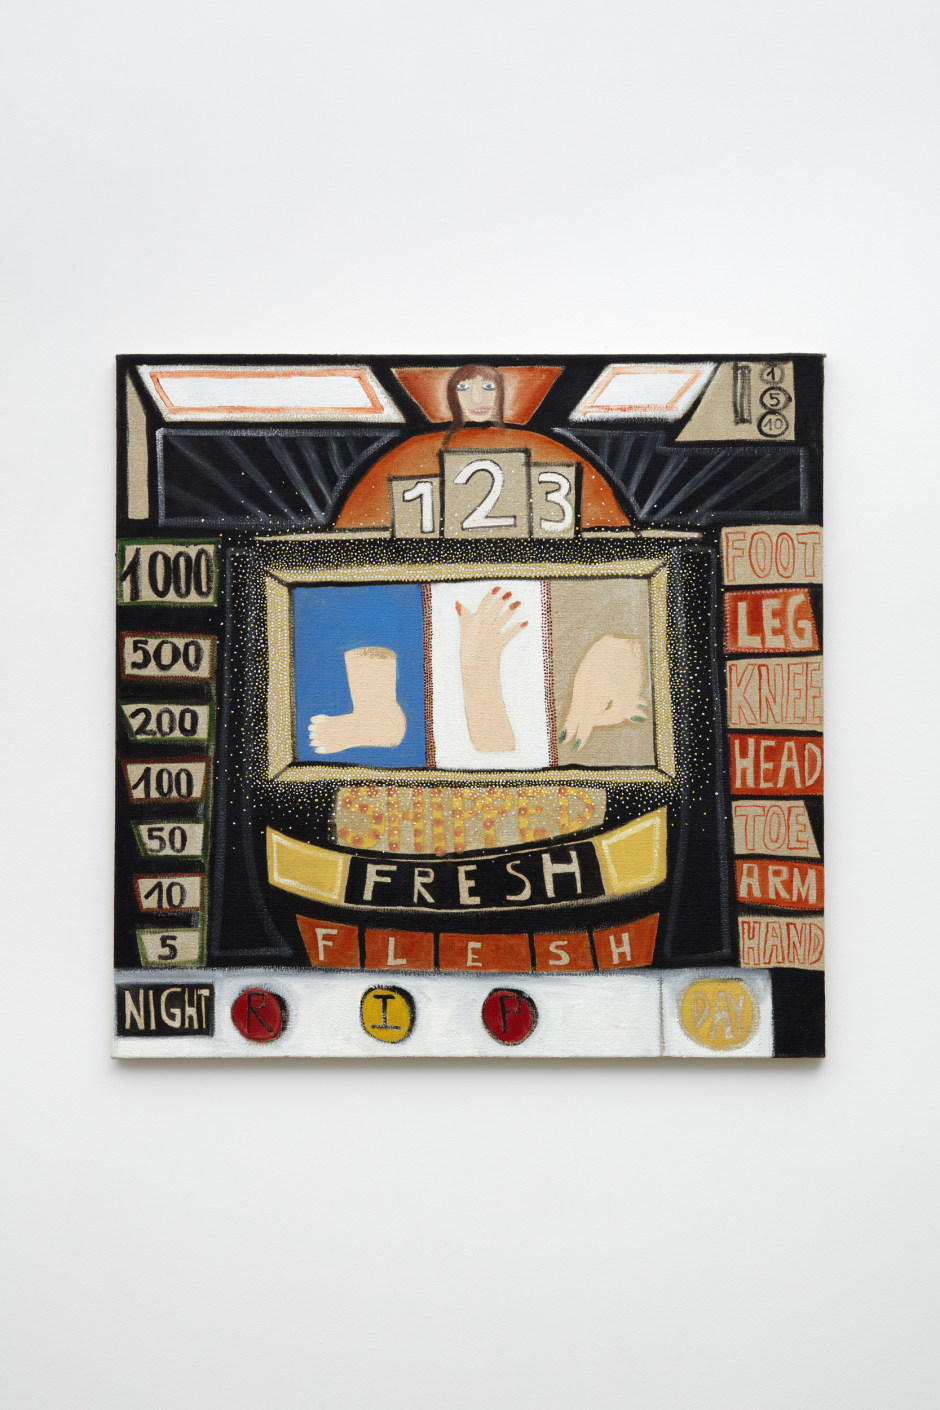 The Slotmachine, 2014  oil on hessian  81 x 81.2 x 2.5 cm /31 7/8 x 32 x 1 in.